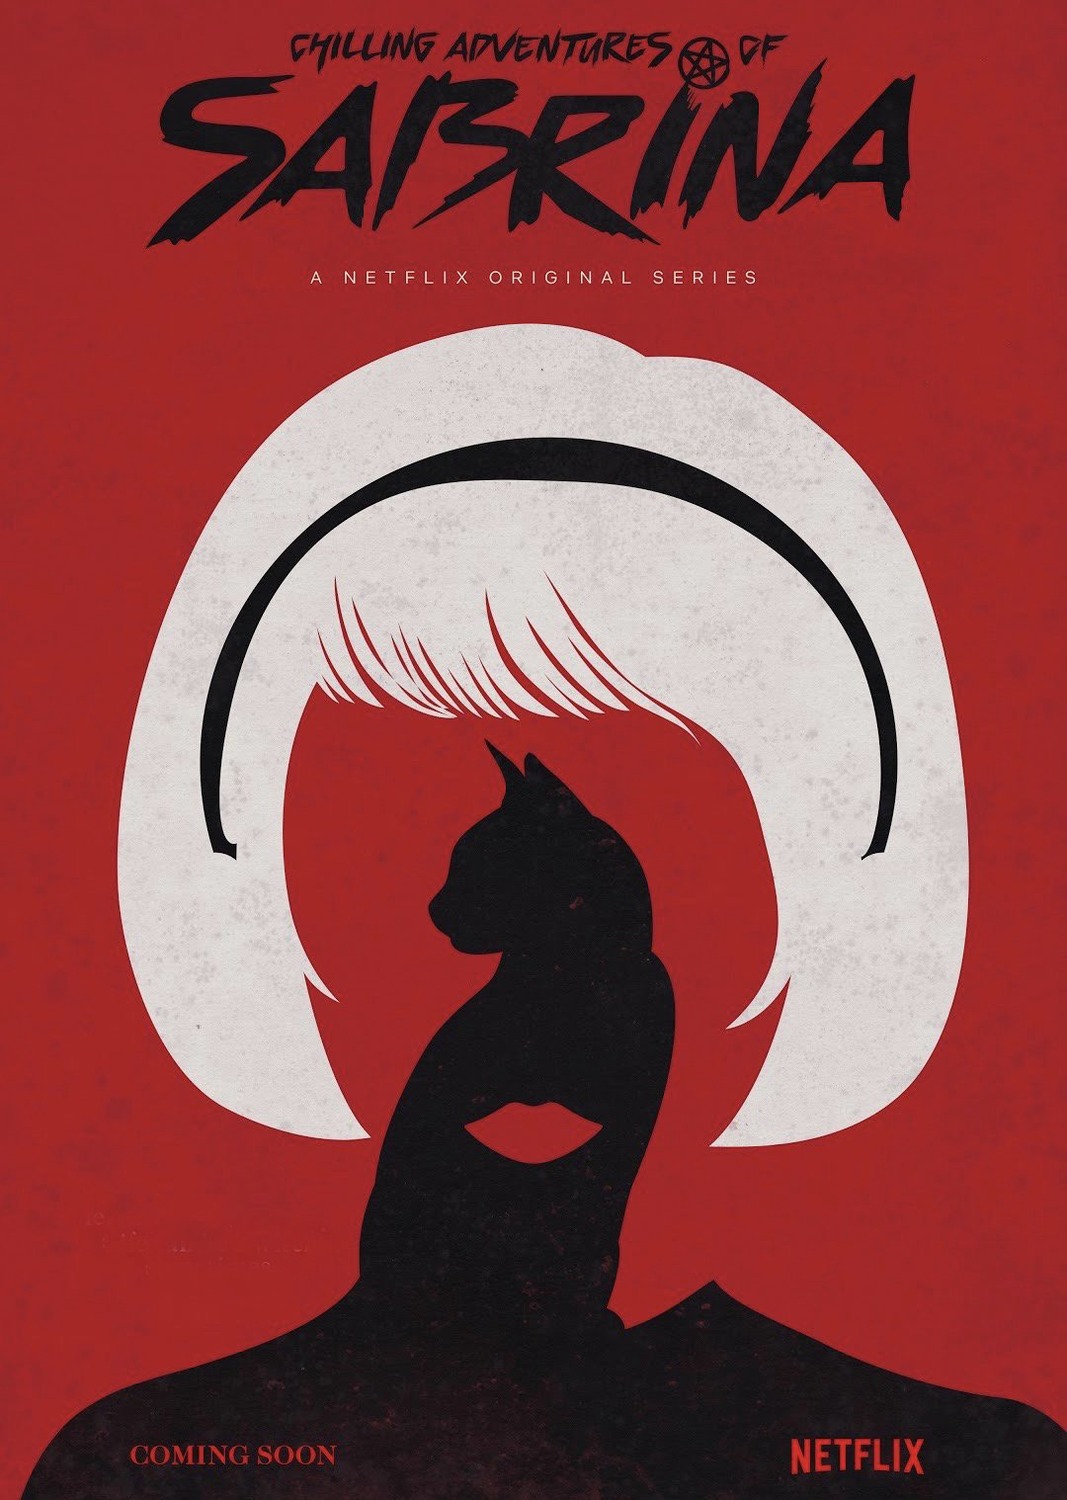 Extra Large TV Poster Image for Chilling Adventures of Sabrina (#1 of 8)